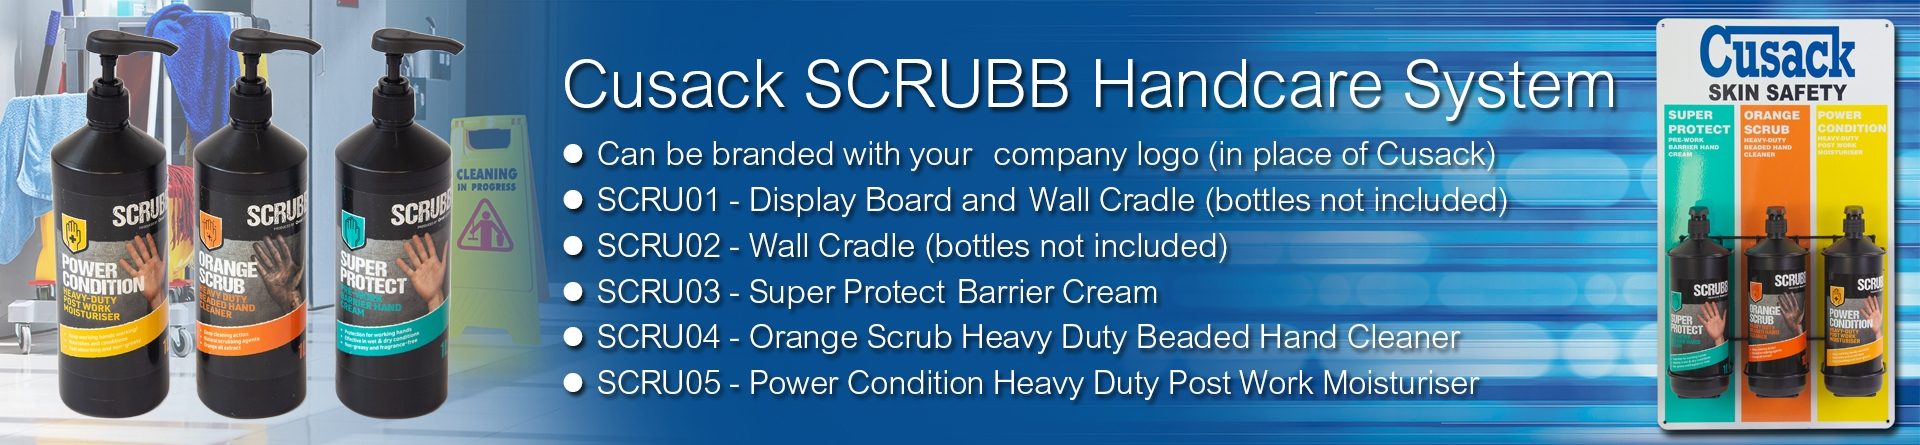 Cusack SCRUBB Hand Care System